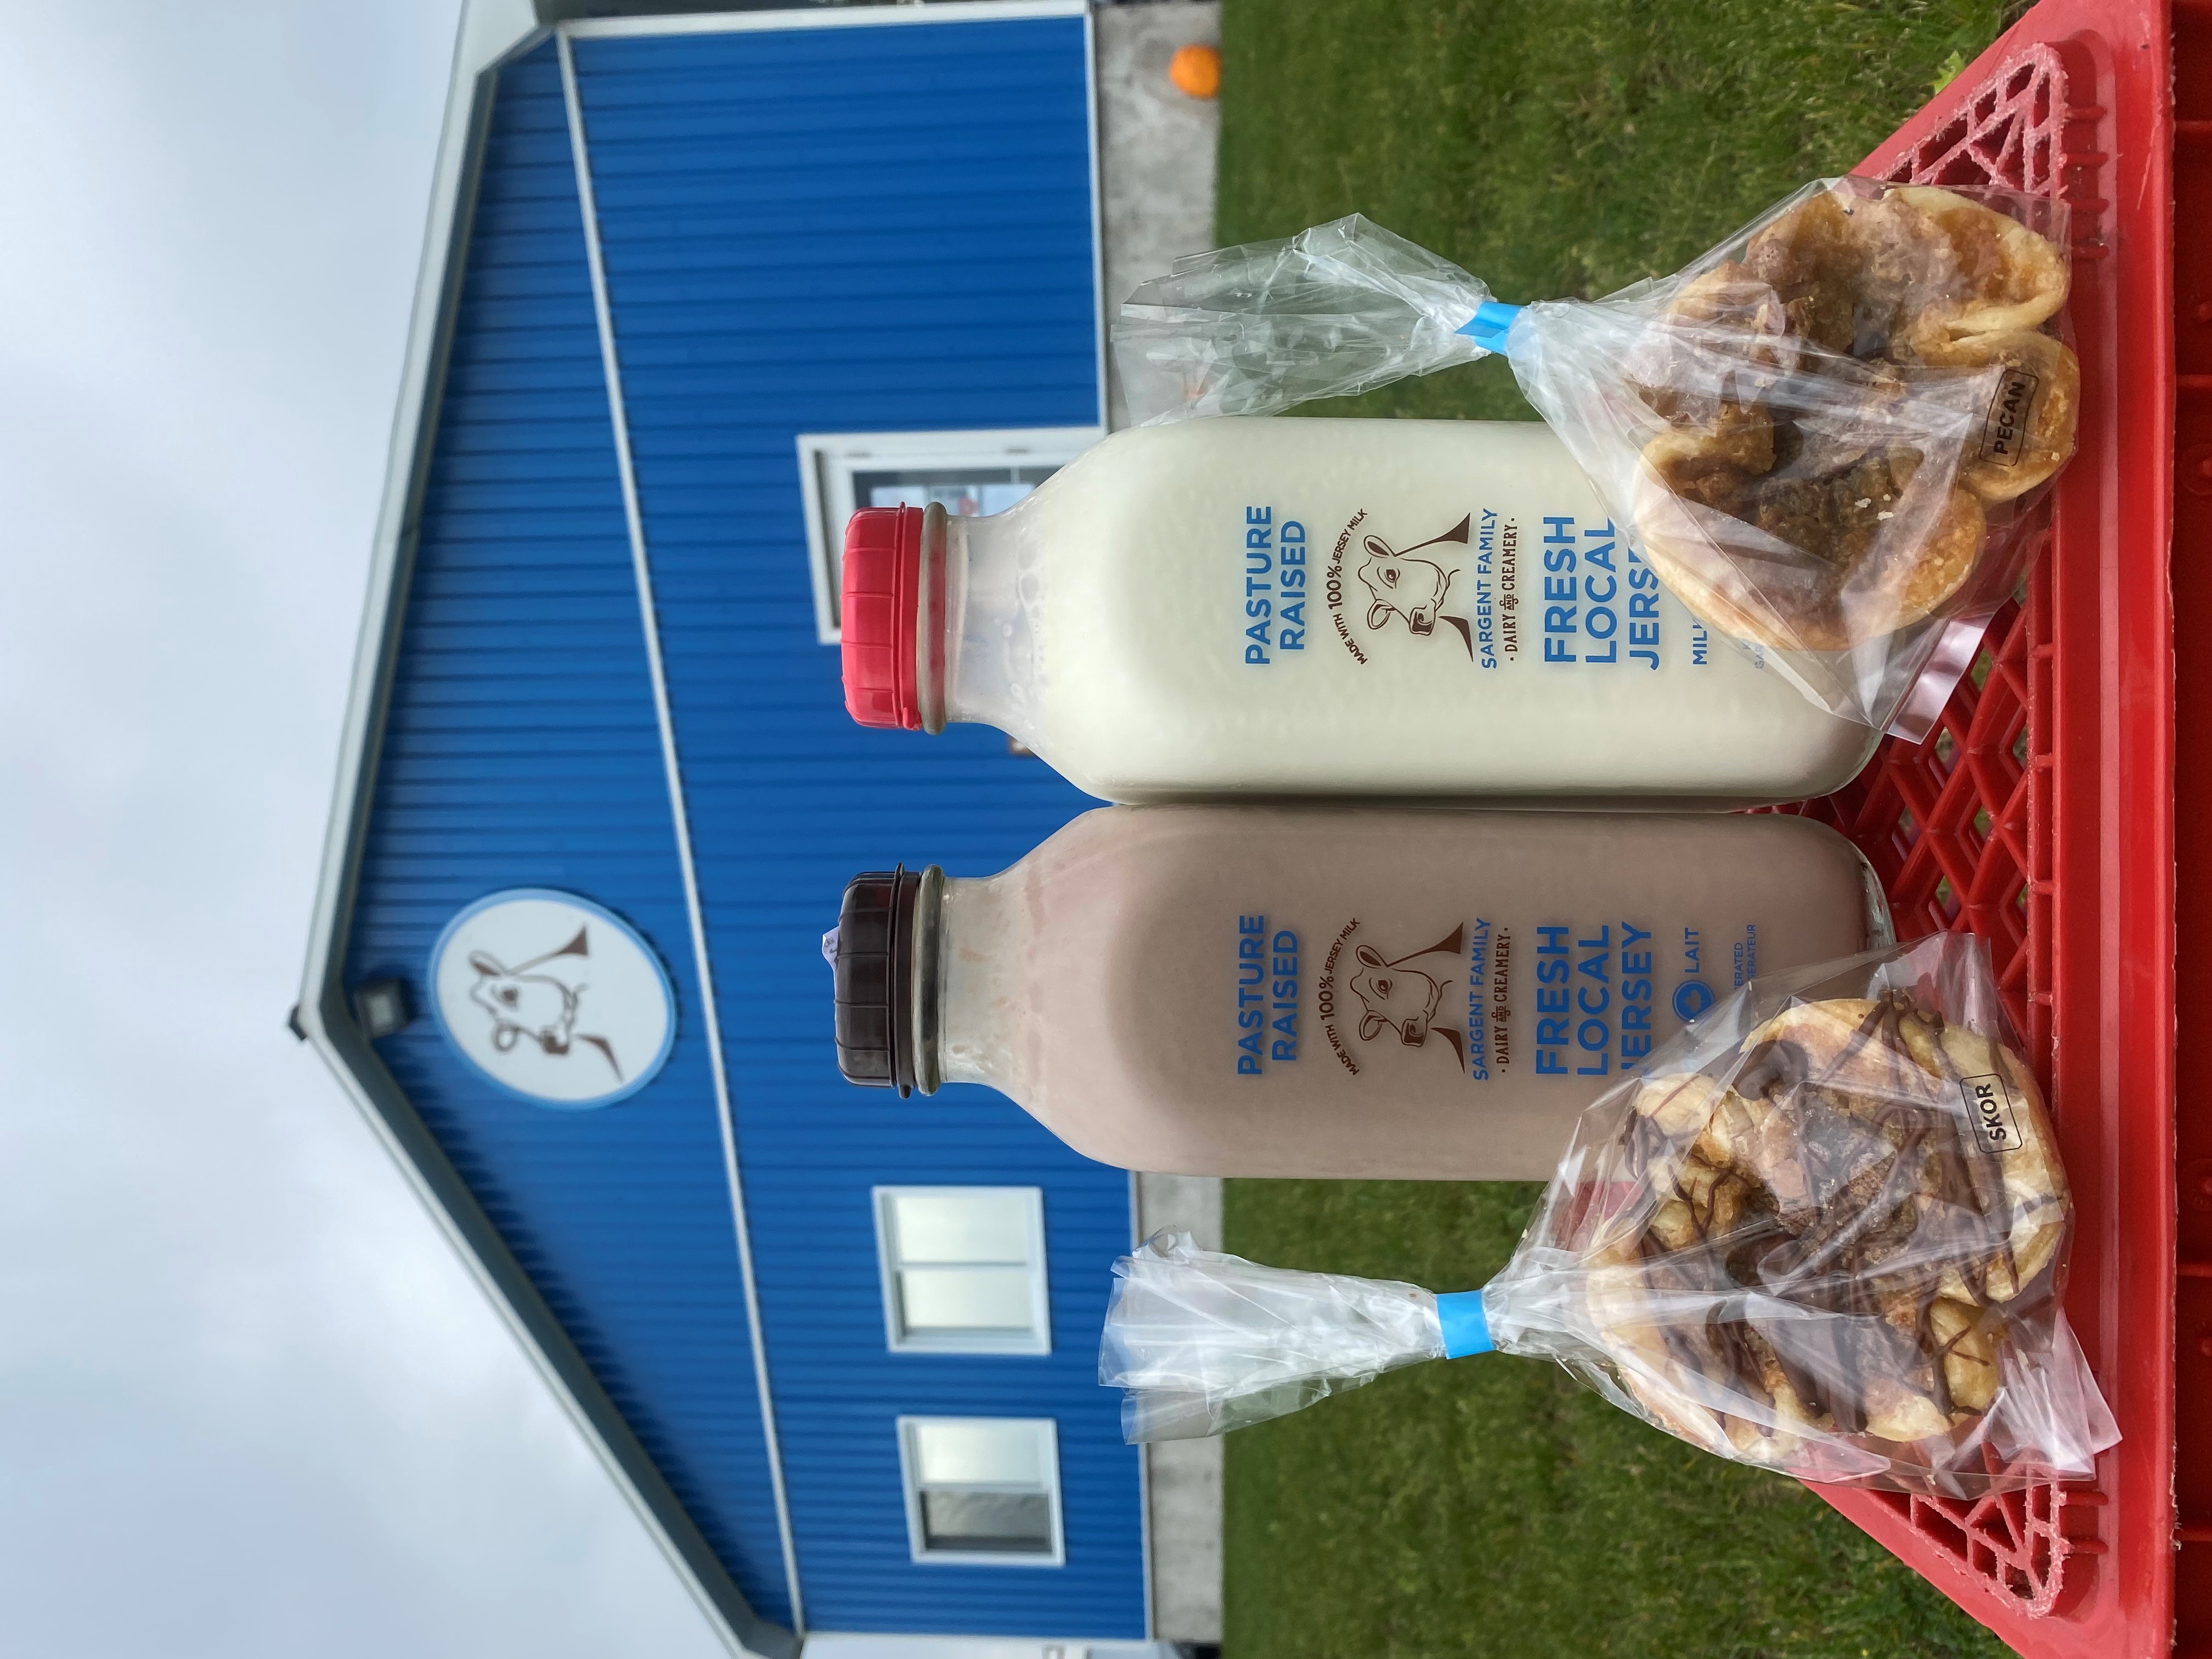 Milk bottles and baked goods in front of blue barn